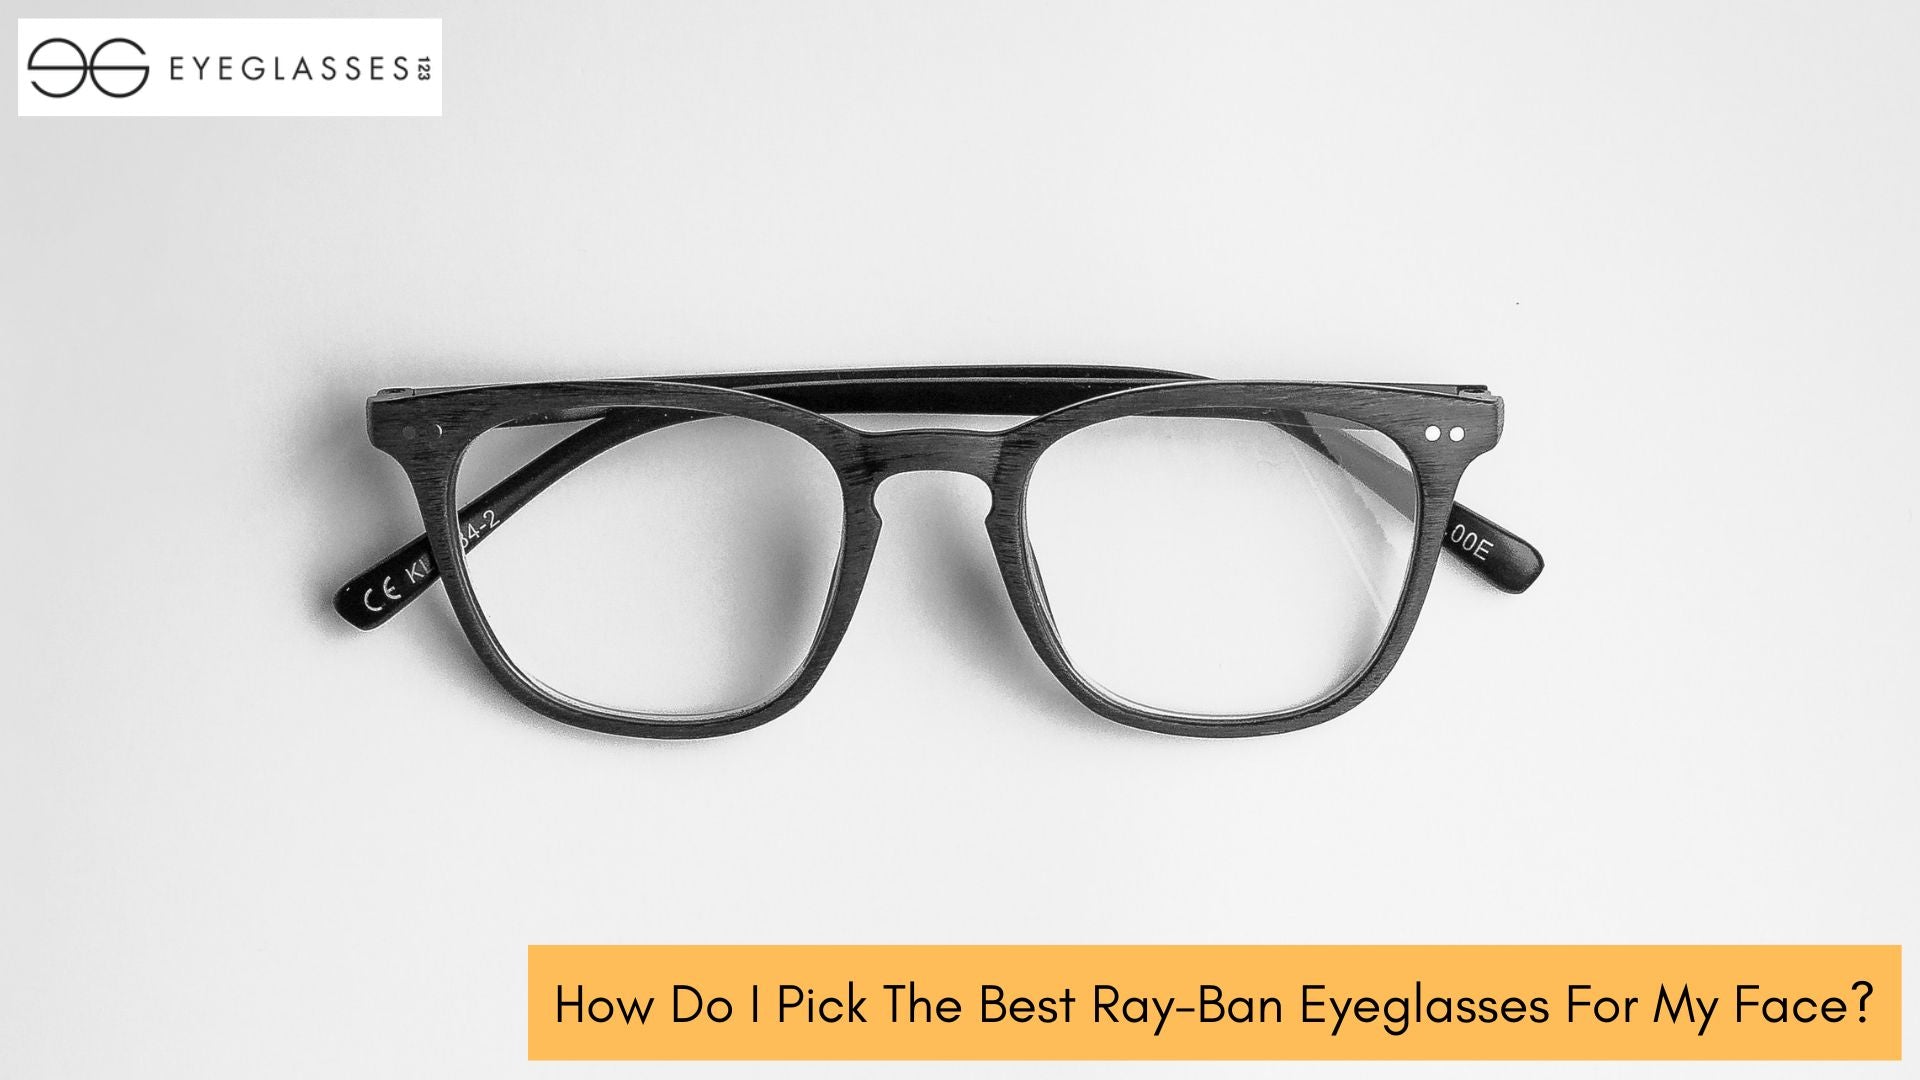 How Do I Pick The Best Ray-Ban Eyeglasses For My Face?